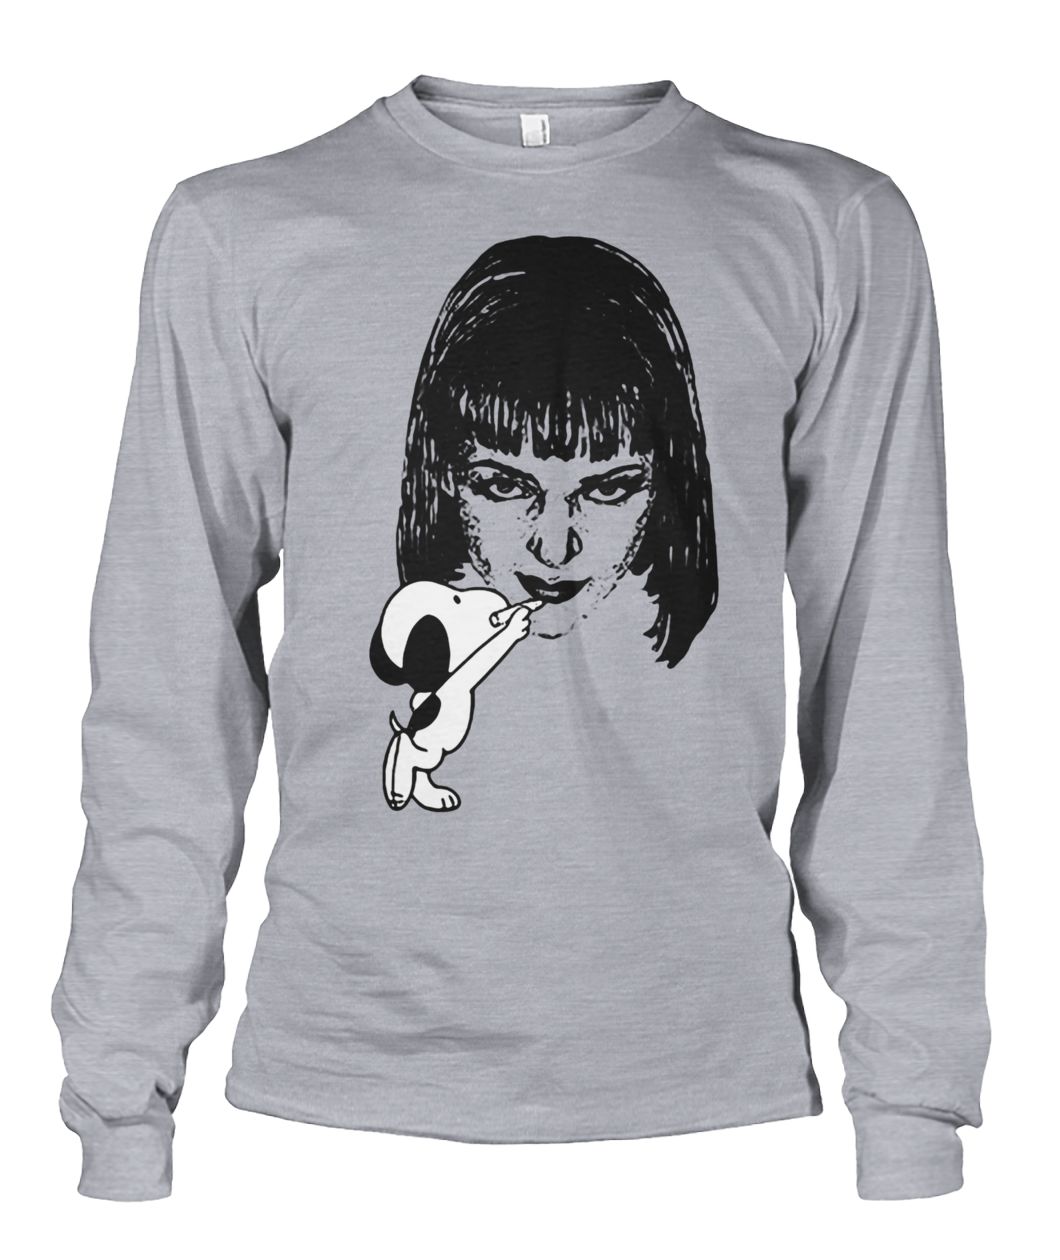 Snoopy drawing mia wallace pulp fiction unisex long sleeve